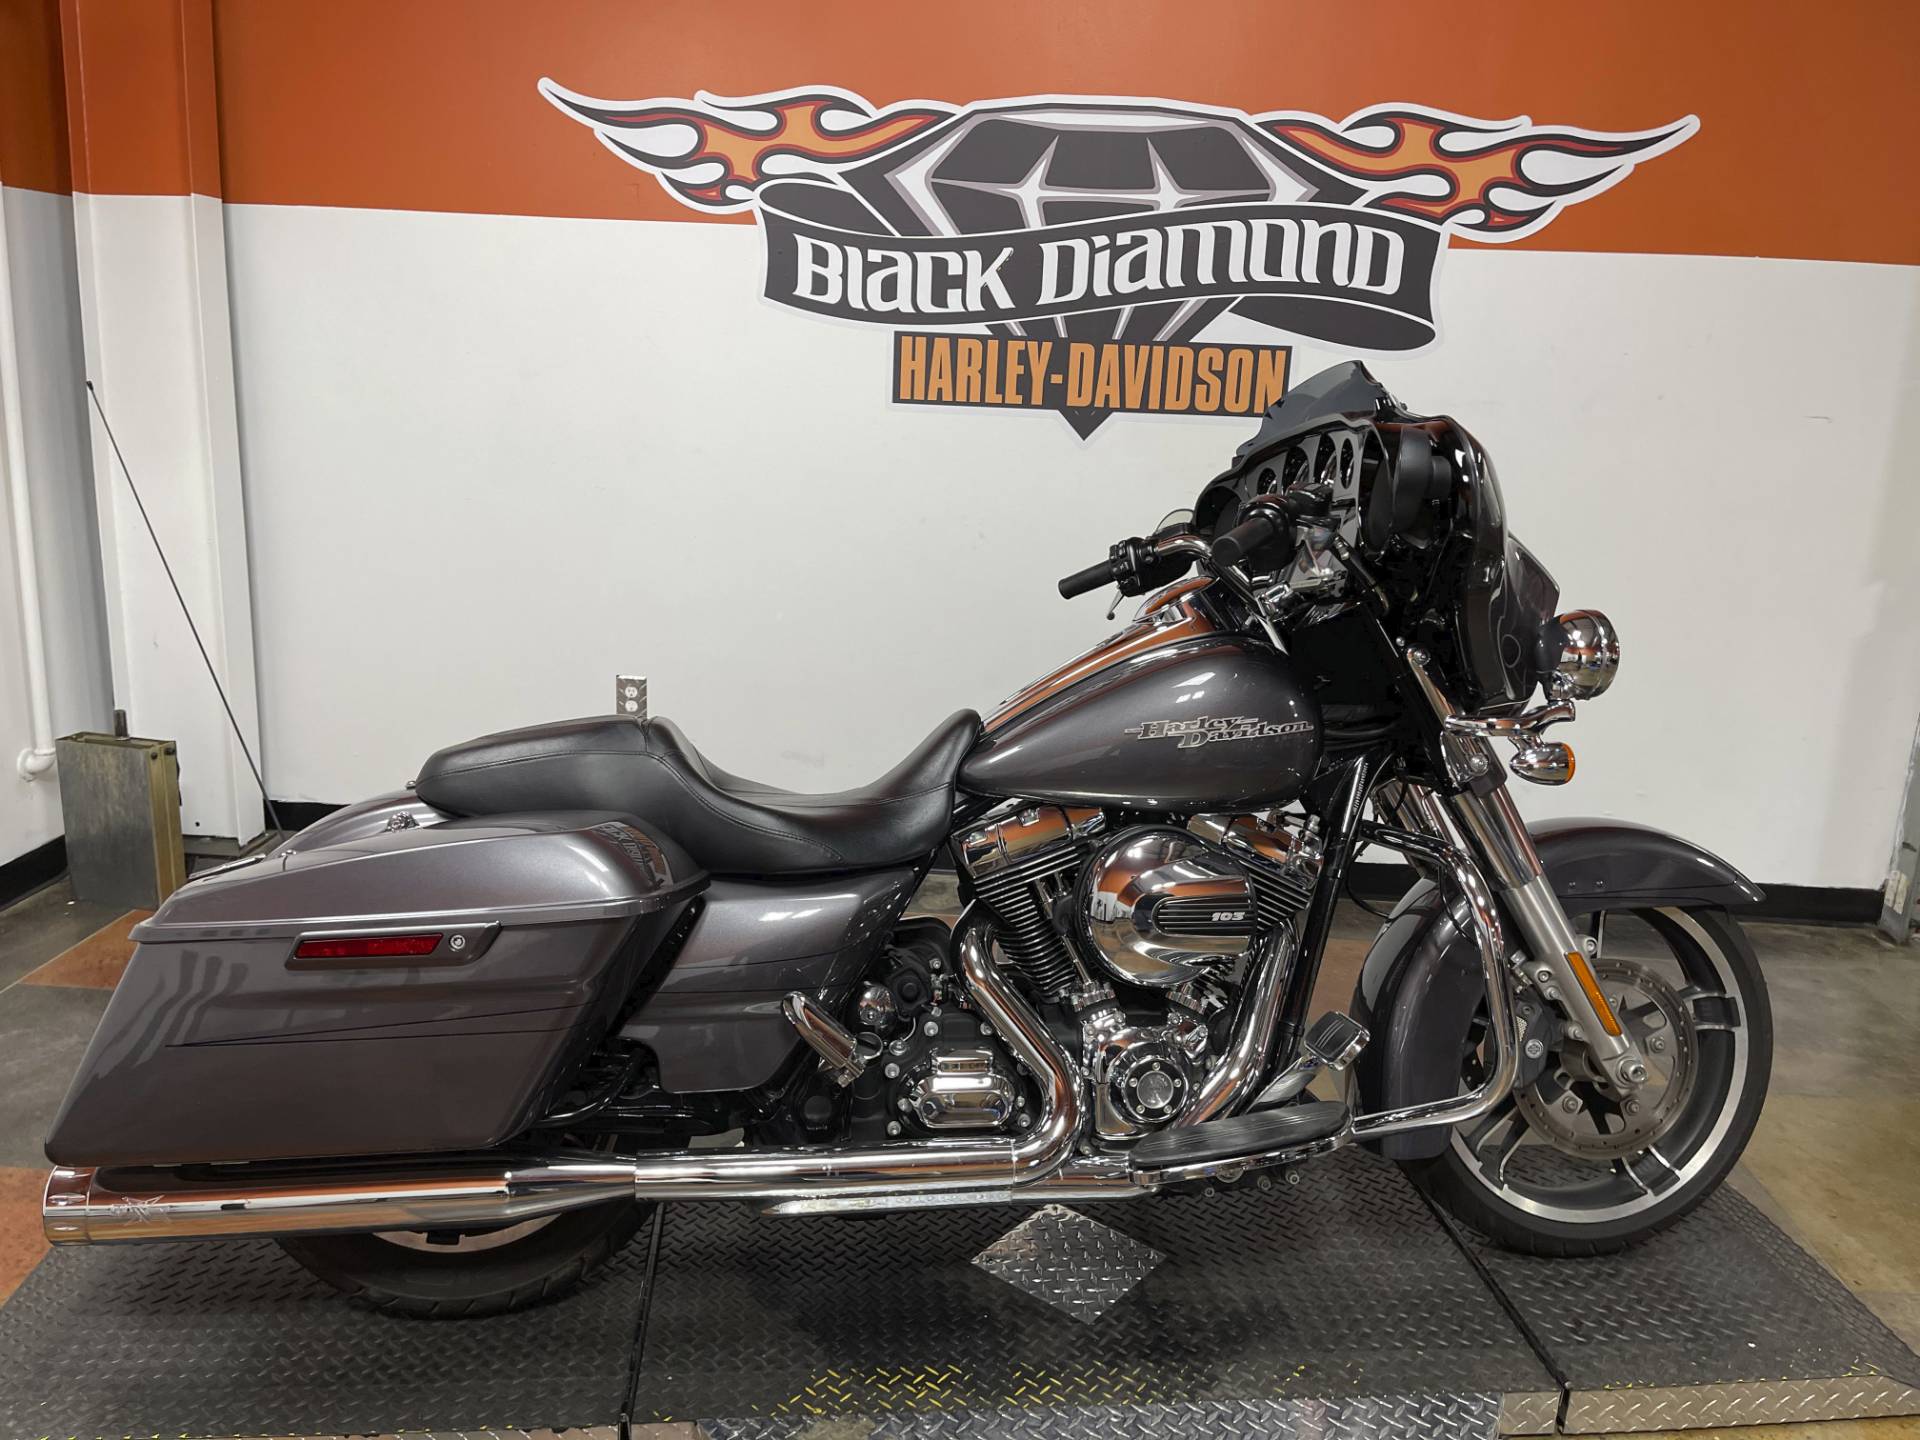 Used 2015 Harley Davidson Street Glide Special Charcoal Pearl Motorcycles In Marion Il U664775